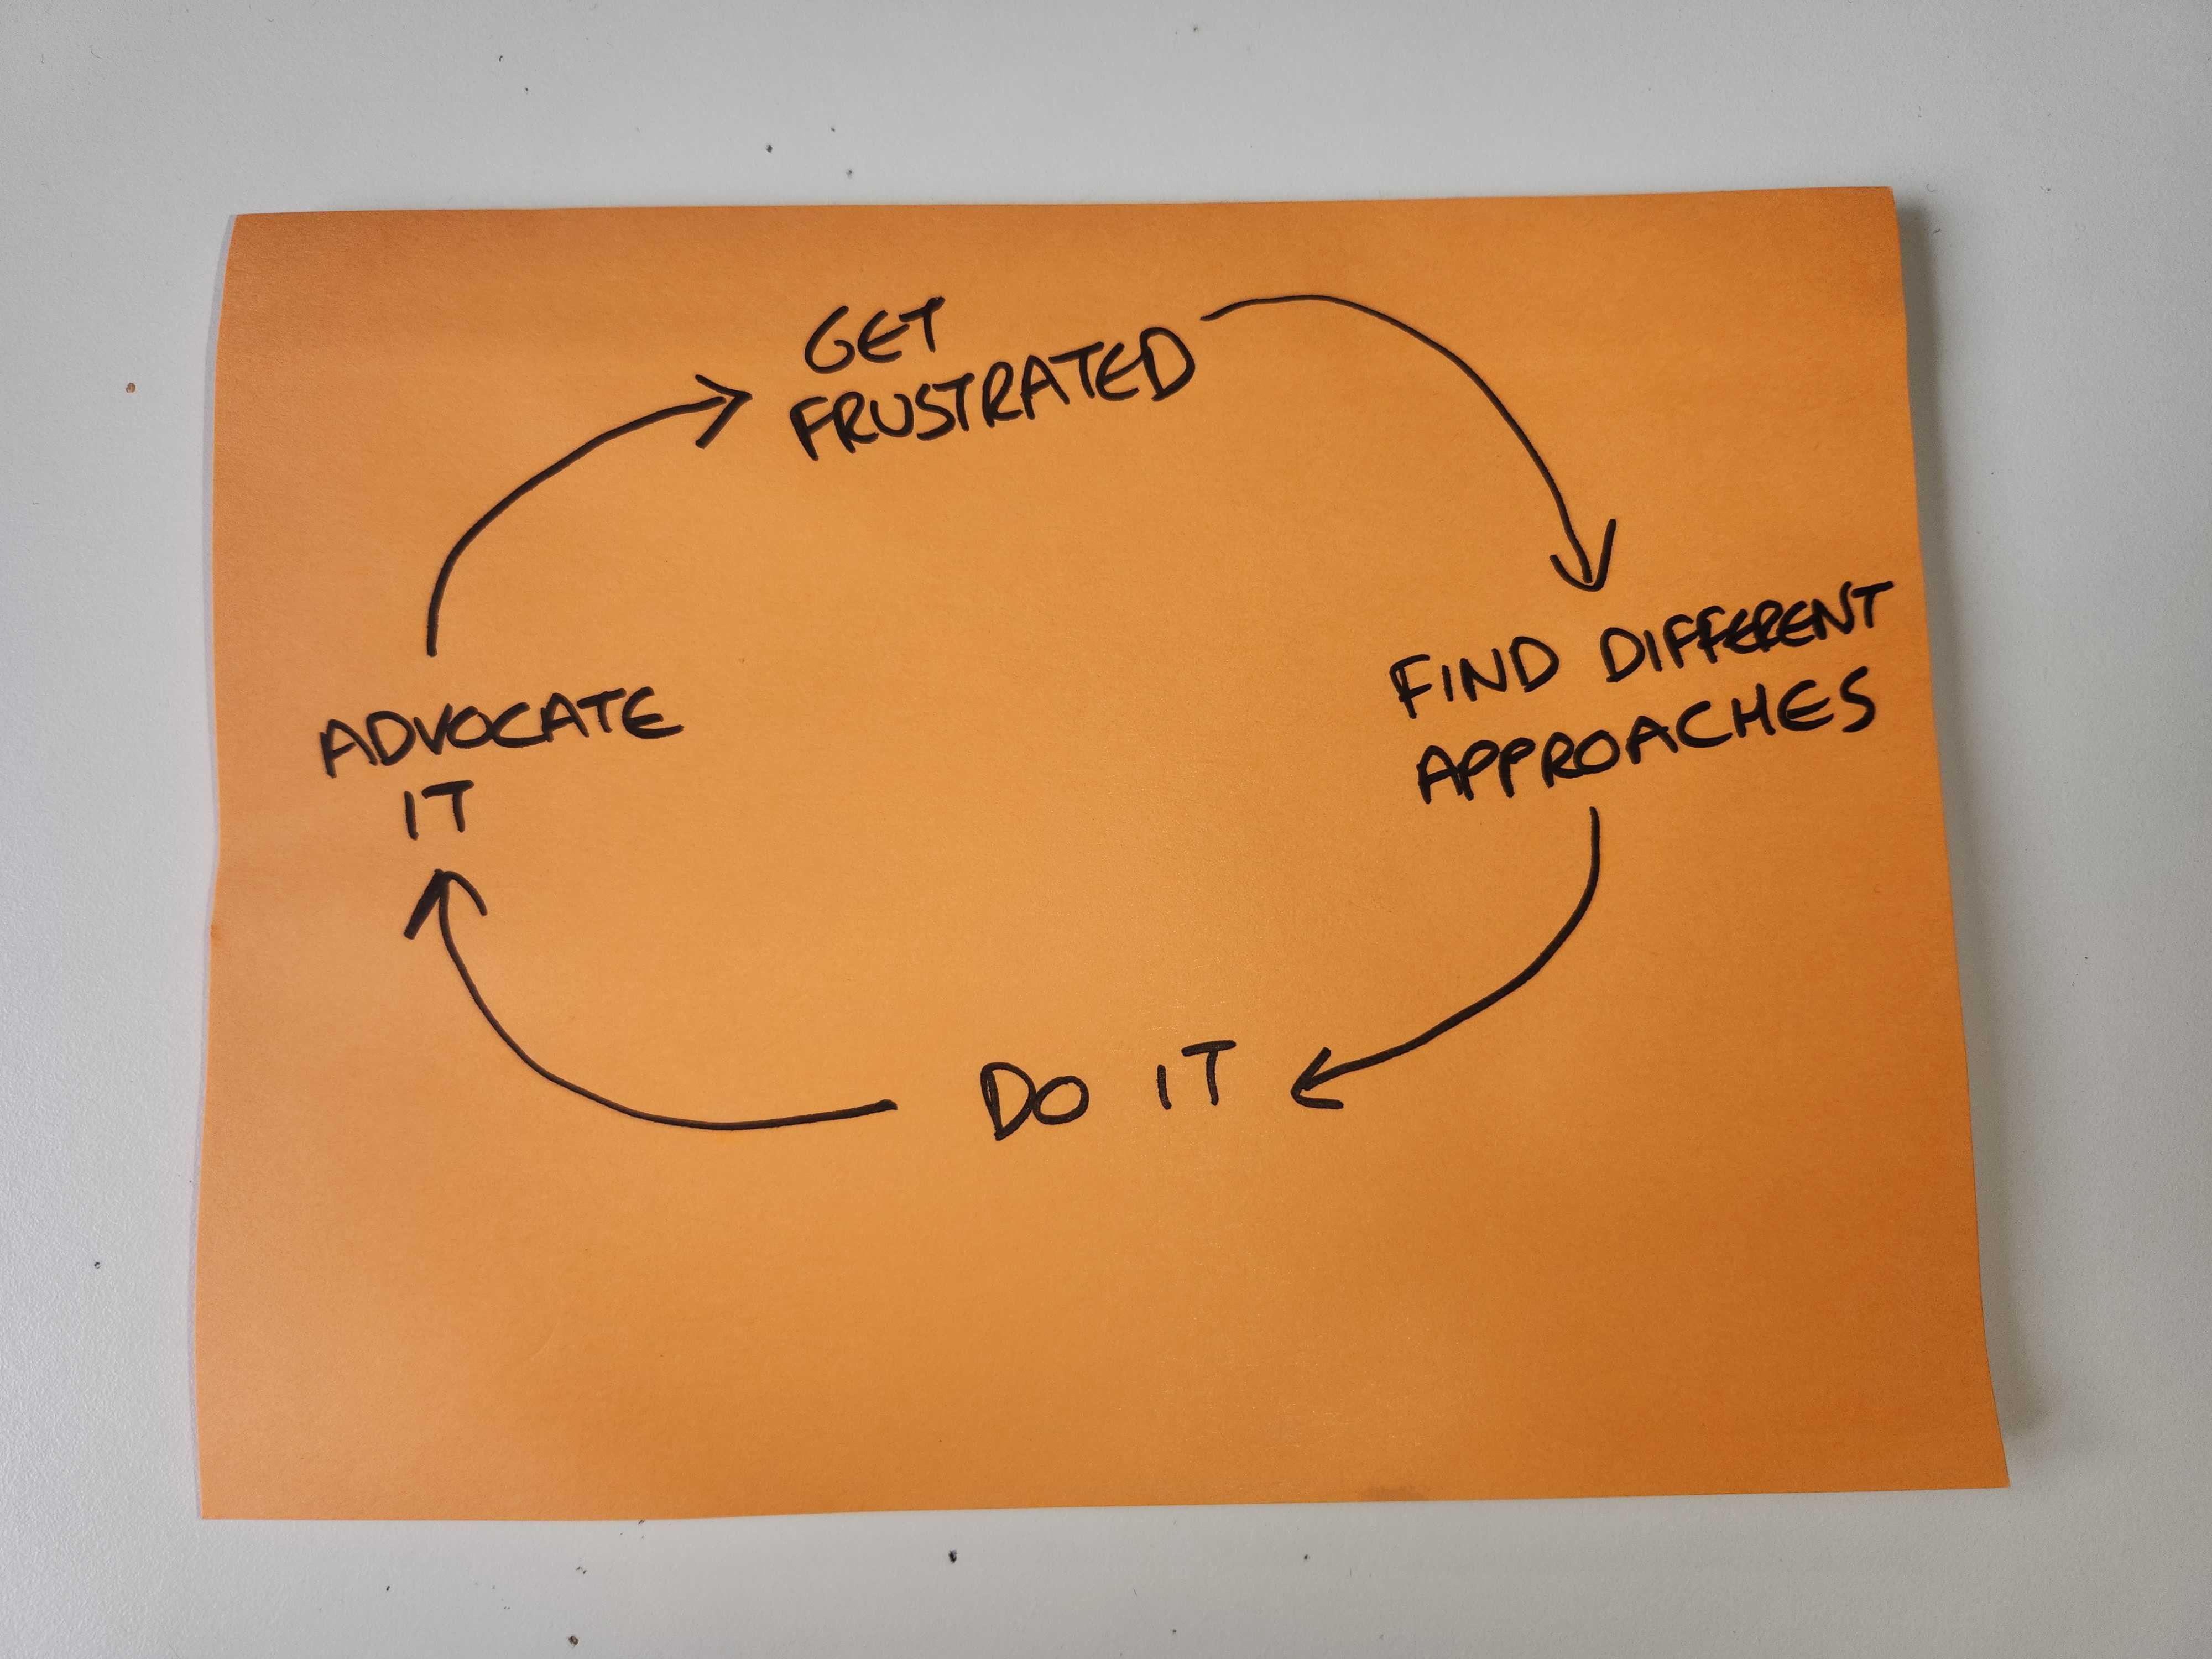 A sketch of my career development loop. 1. Get frustrated. 2. Find a different approach. 3.do it. 4. Advocate for it. 5. Repeat